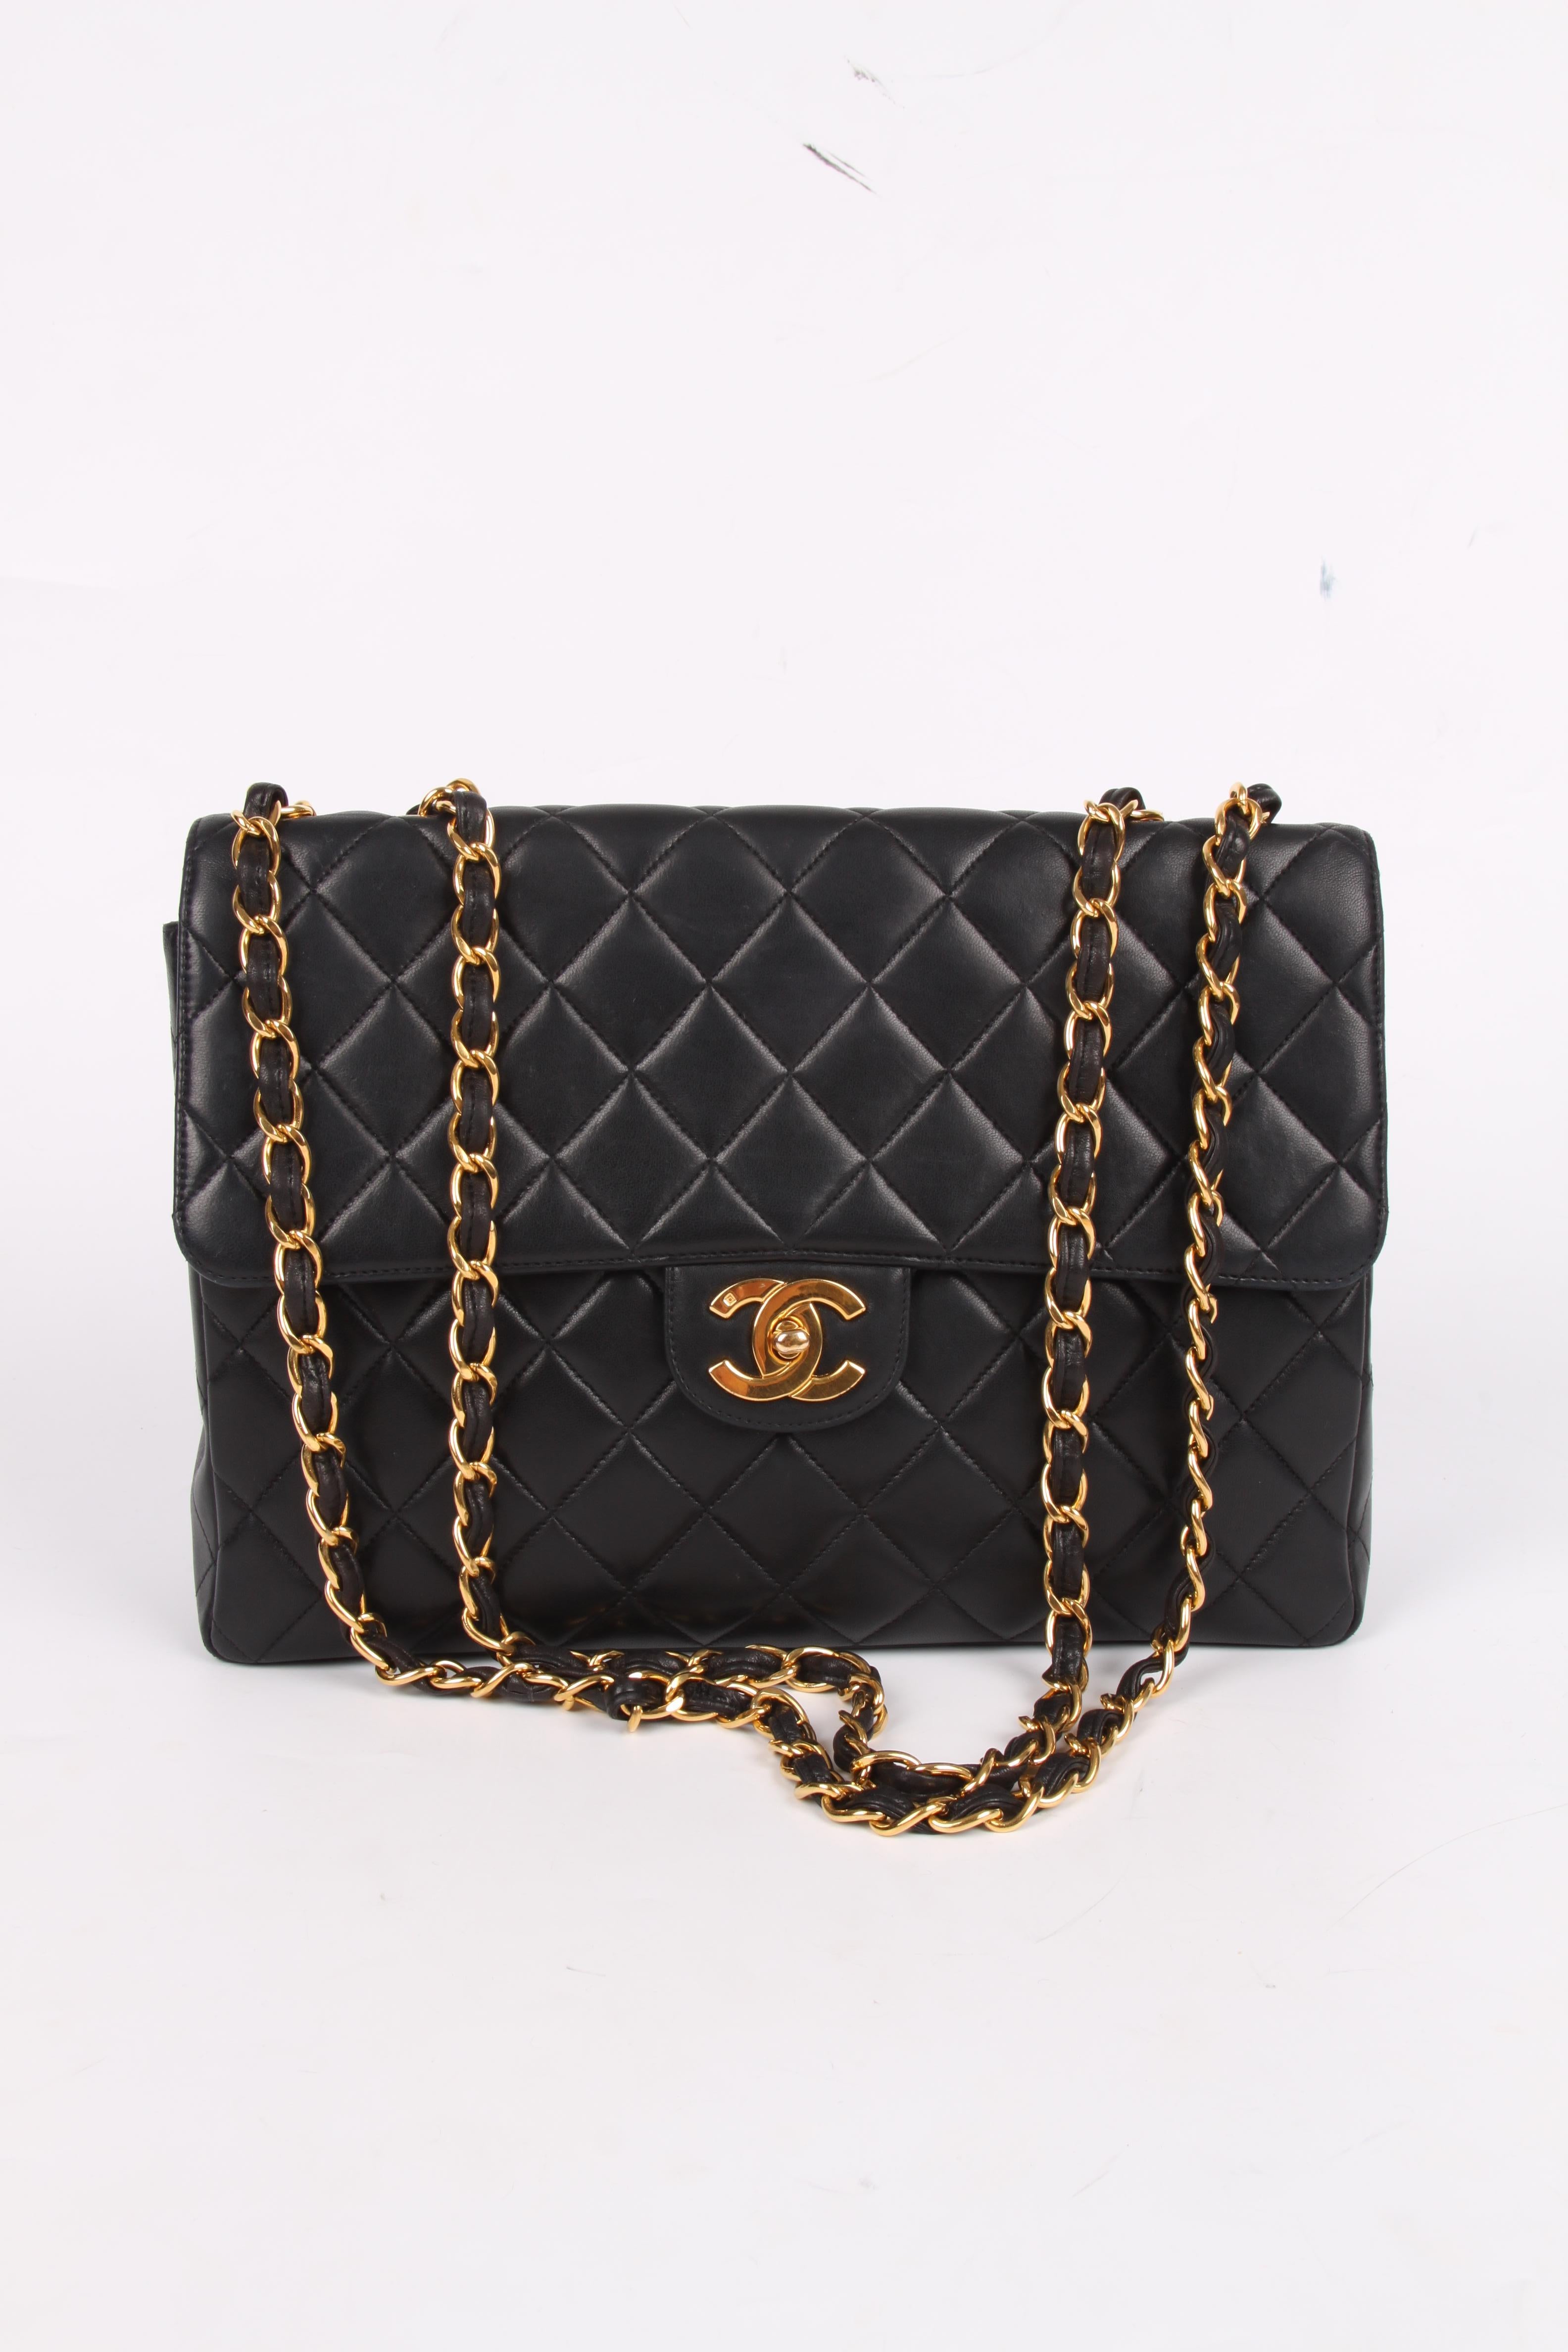 A vintage classic by Chanel: the Timeless Jumbo Flap Bag in black lambskin leather.  

This 2.55 Jumbo Timeless Flap Bag is from 1994-1996 and its the larger size of this classic model. It measures as much as 30 centimeters in length.

A chunky